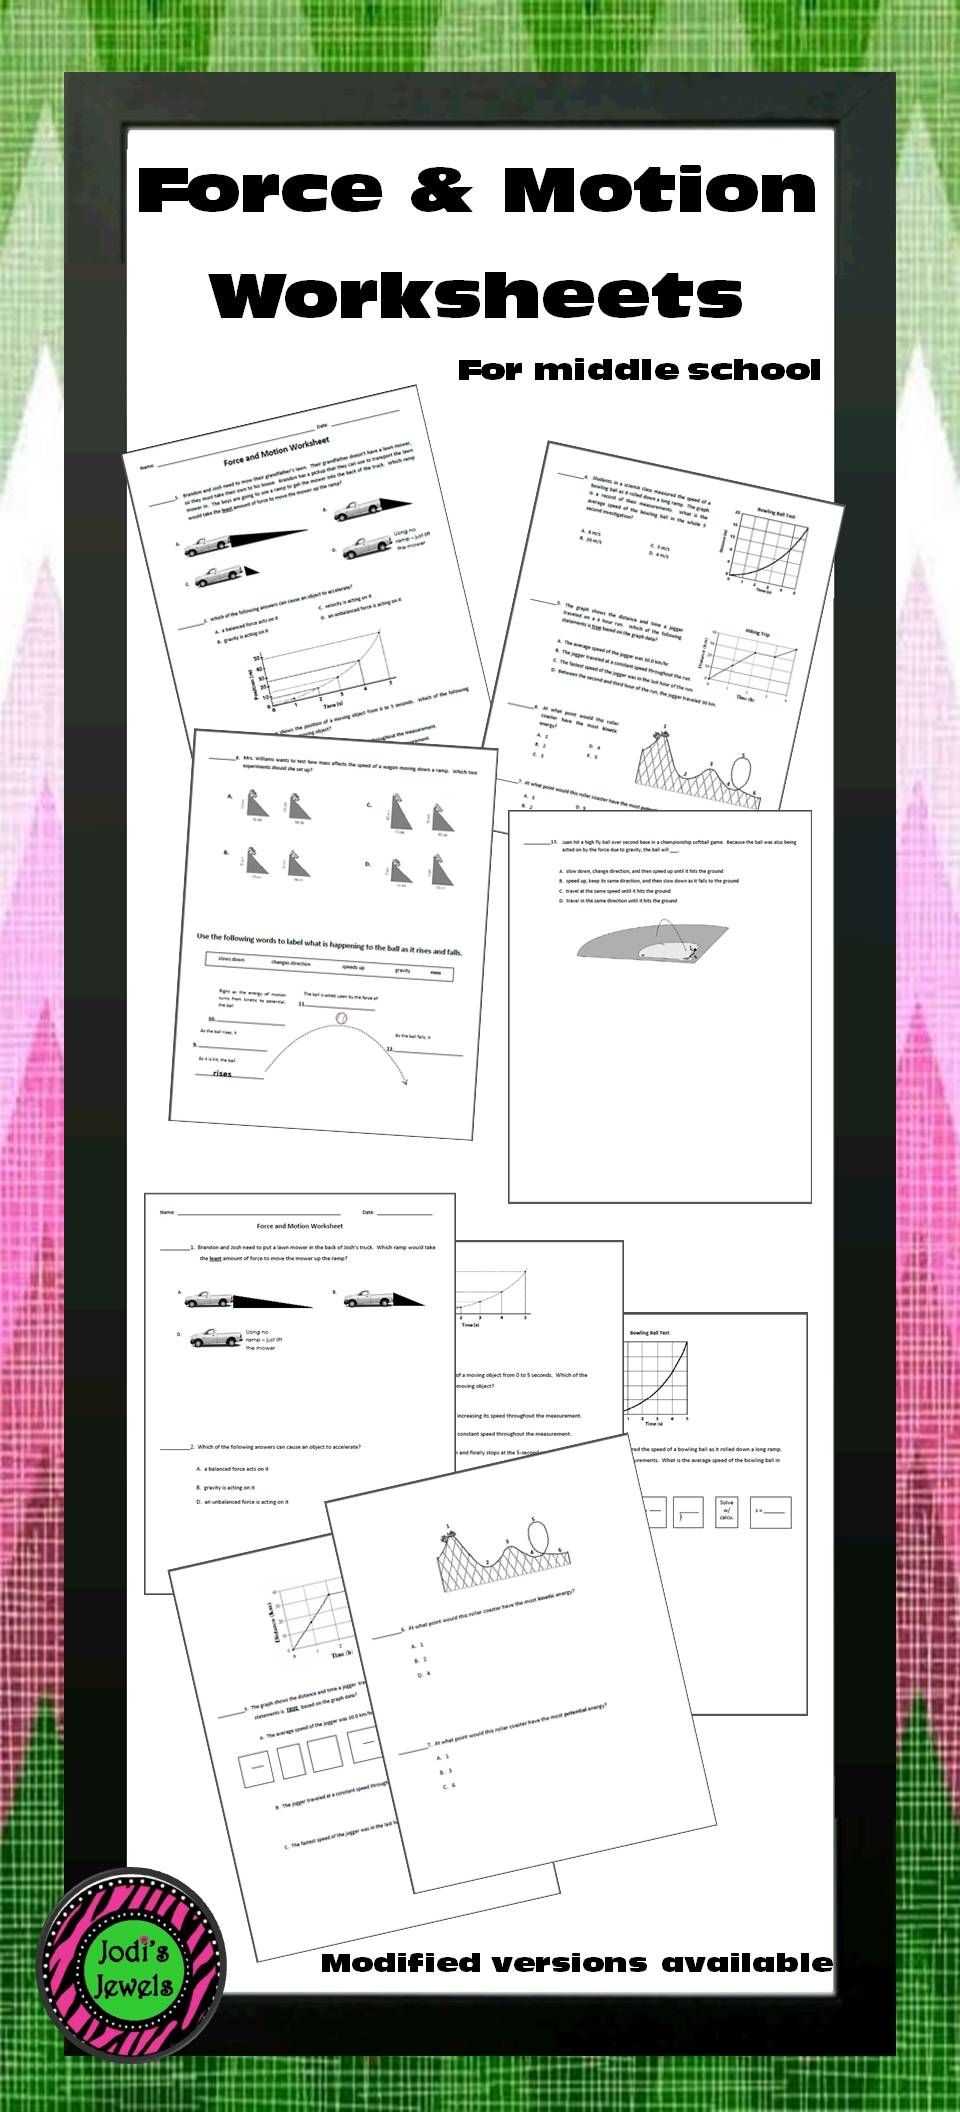 Speed Velocity and Acceleration Worksheet Answer Key as Well as force and Motion Worksheet Pinterest